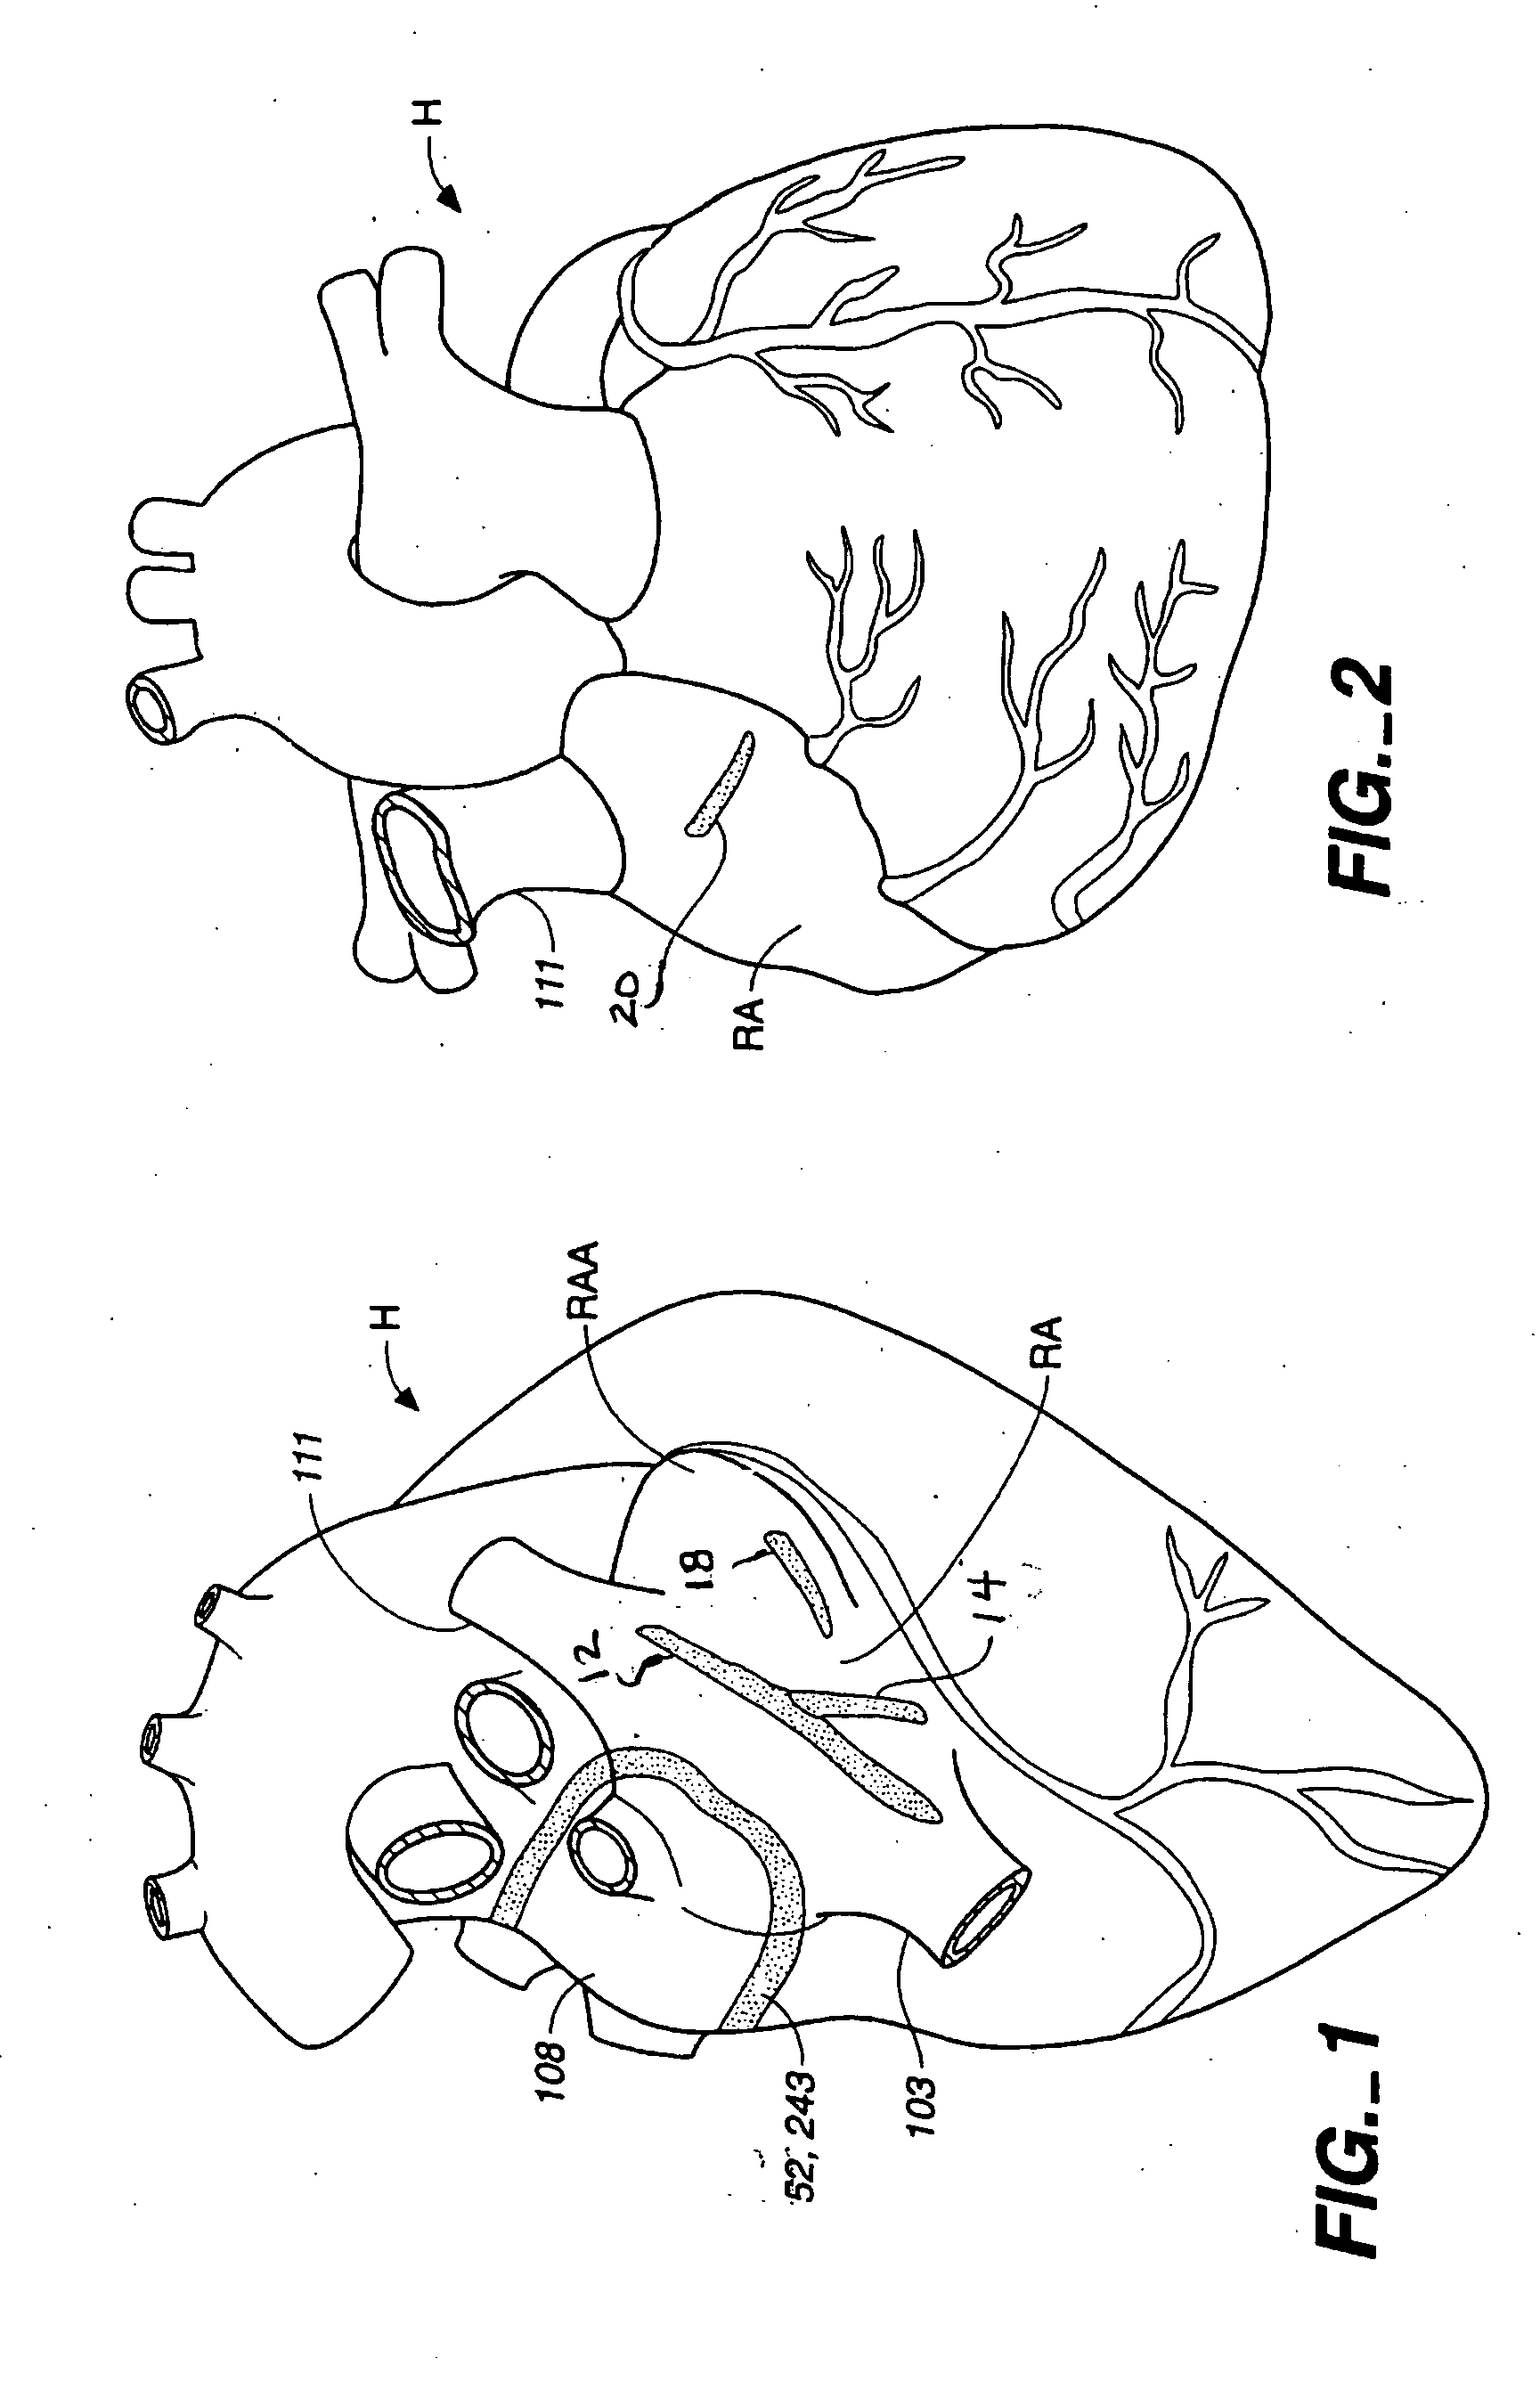 System and methods for treating atrial fibrillation using electroporation